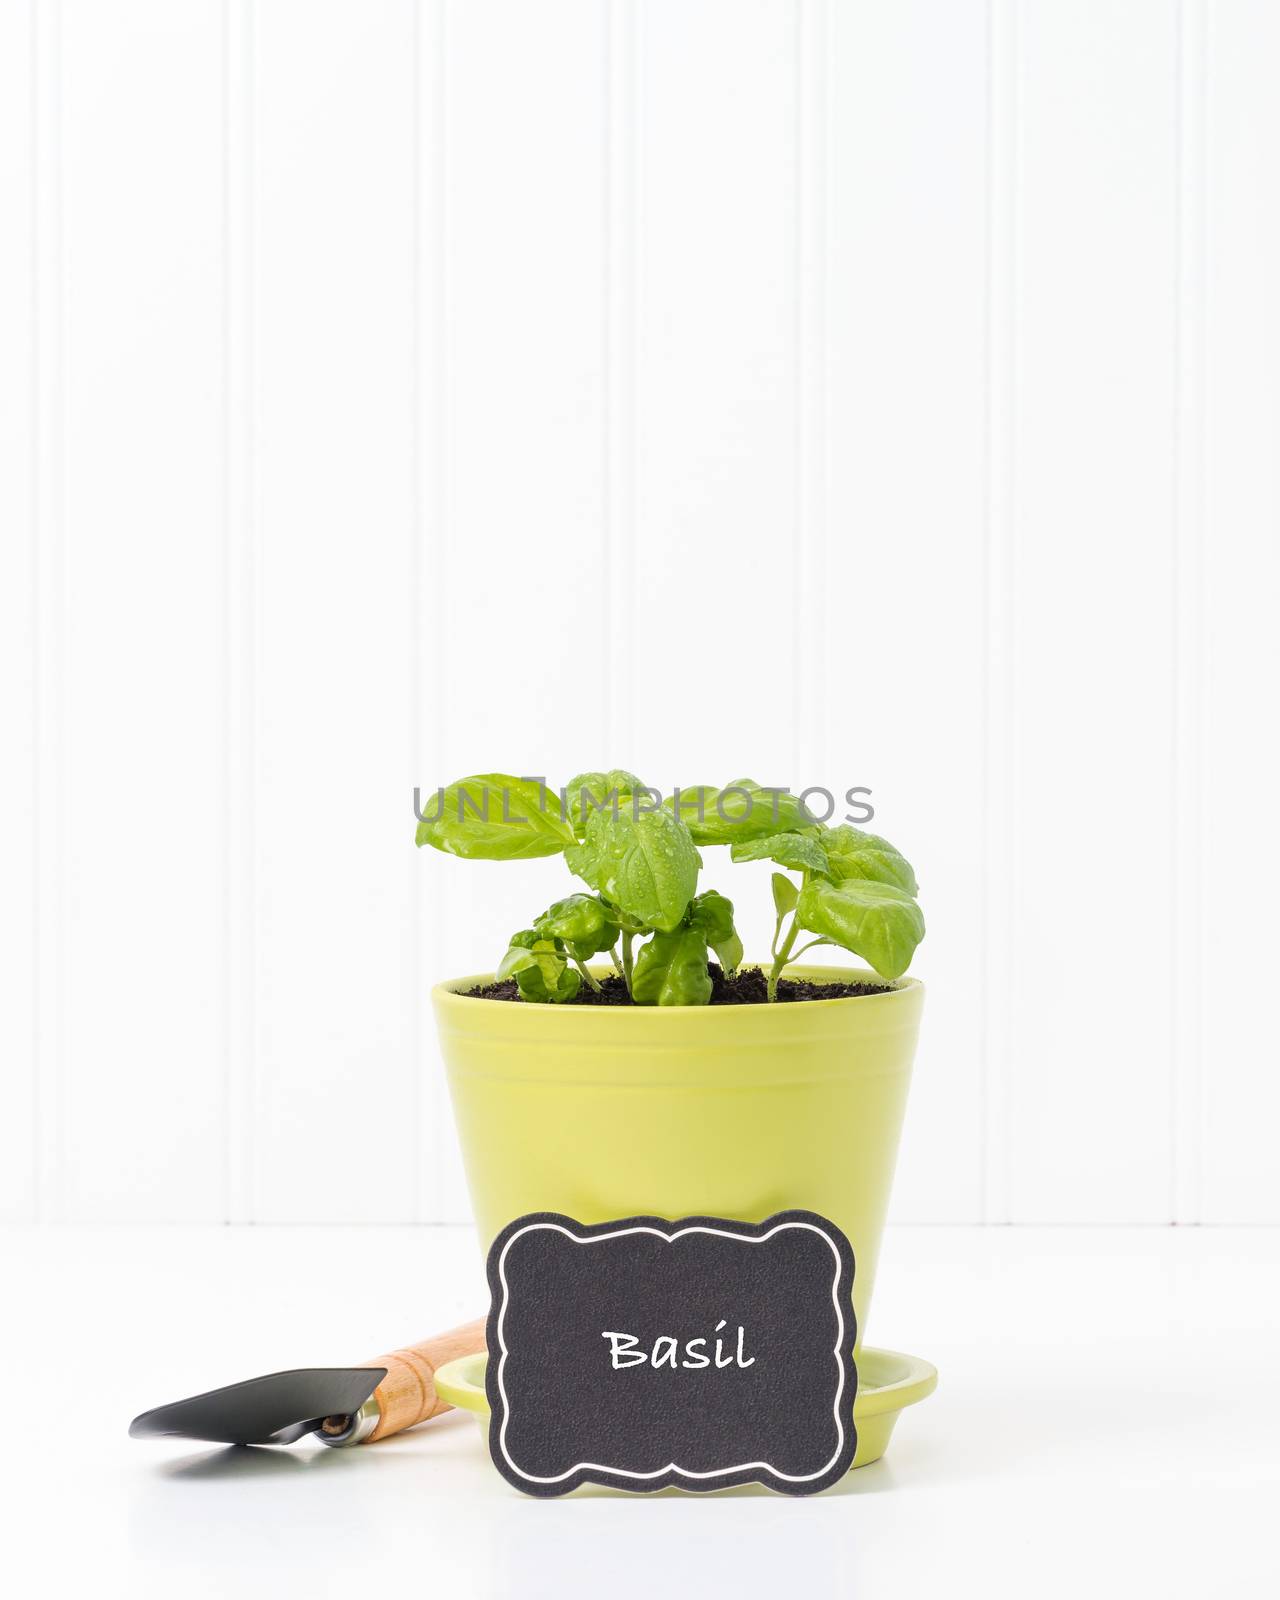 Sweet basil planted into a green ceramic flower pot.